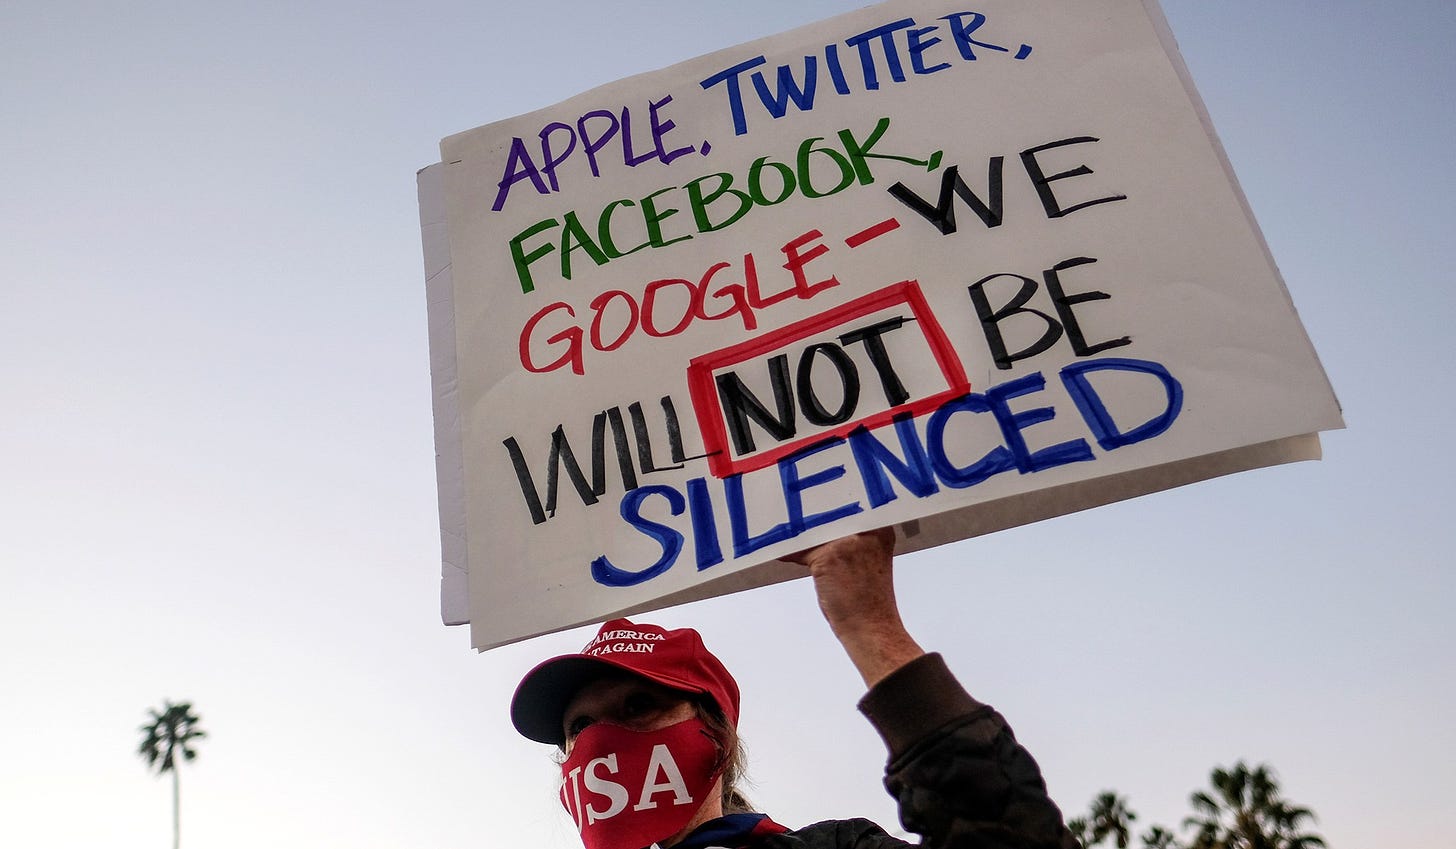 Apple, Twitter, Facebook, Google we will NOT be silenced